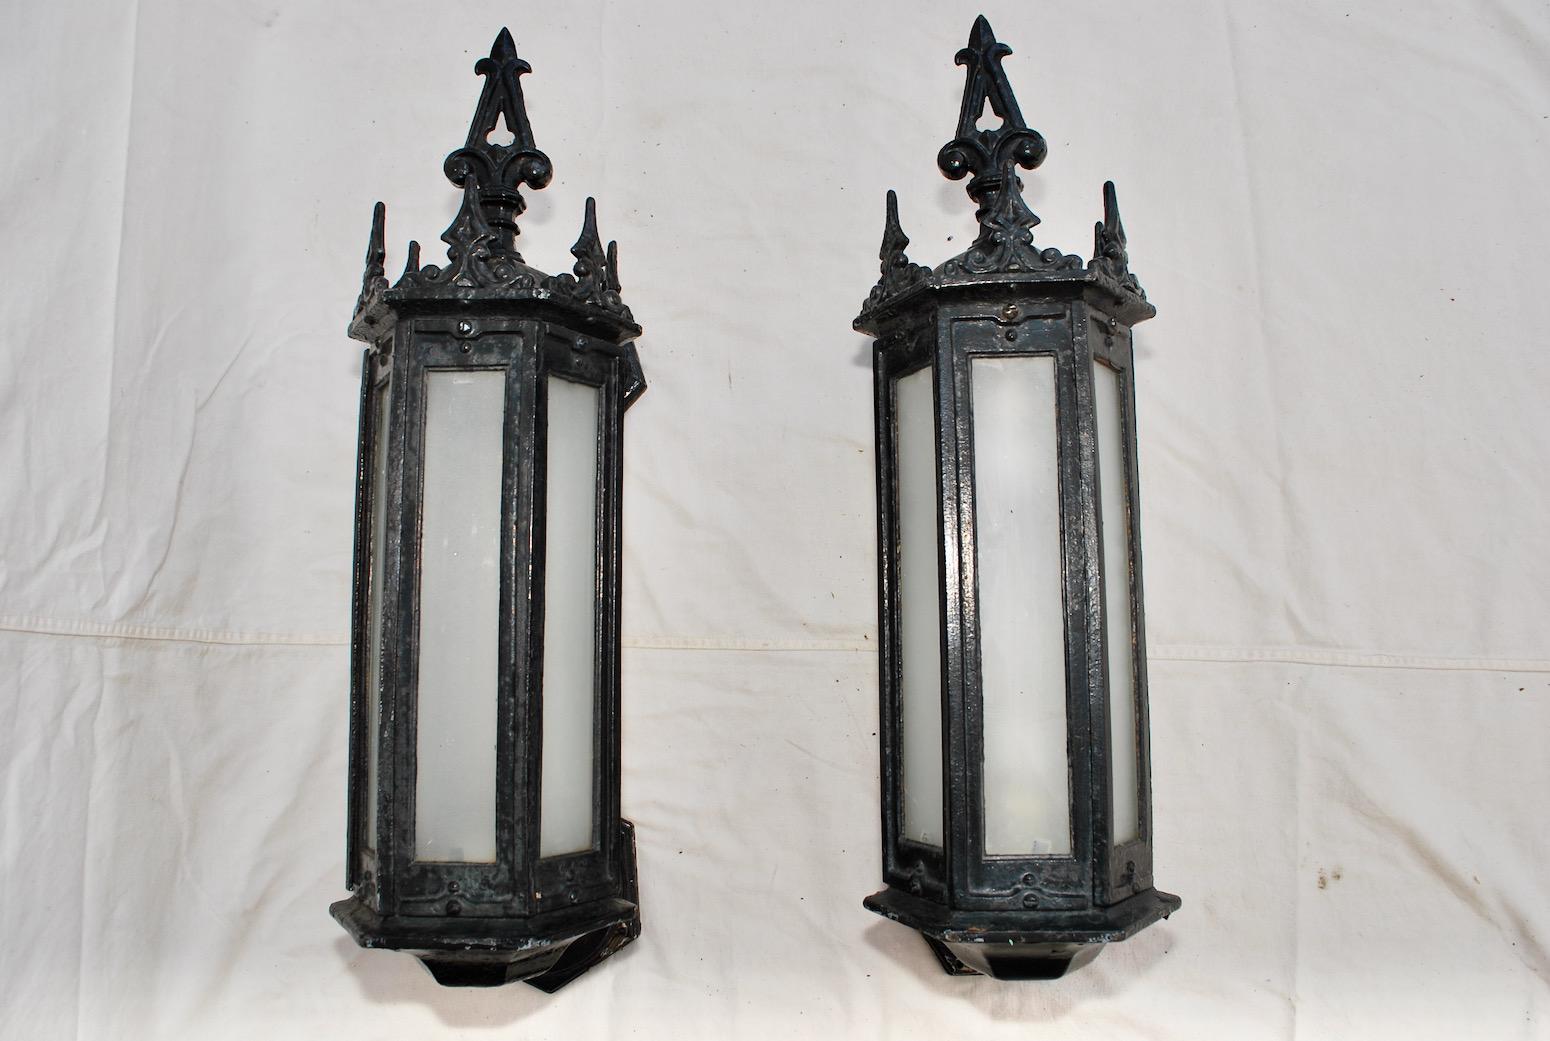 I have been selling lights for 25 years, this is the first time I get one of these, they are quite rare and imposing , they are made of solid cast iron, they are 40 pounds each.